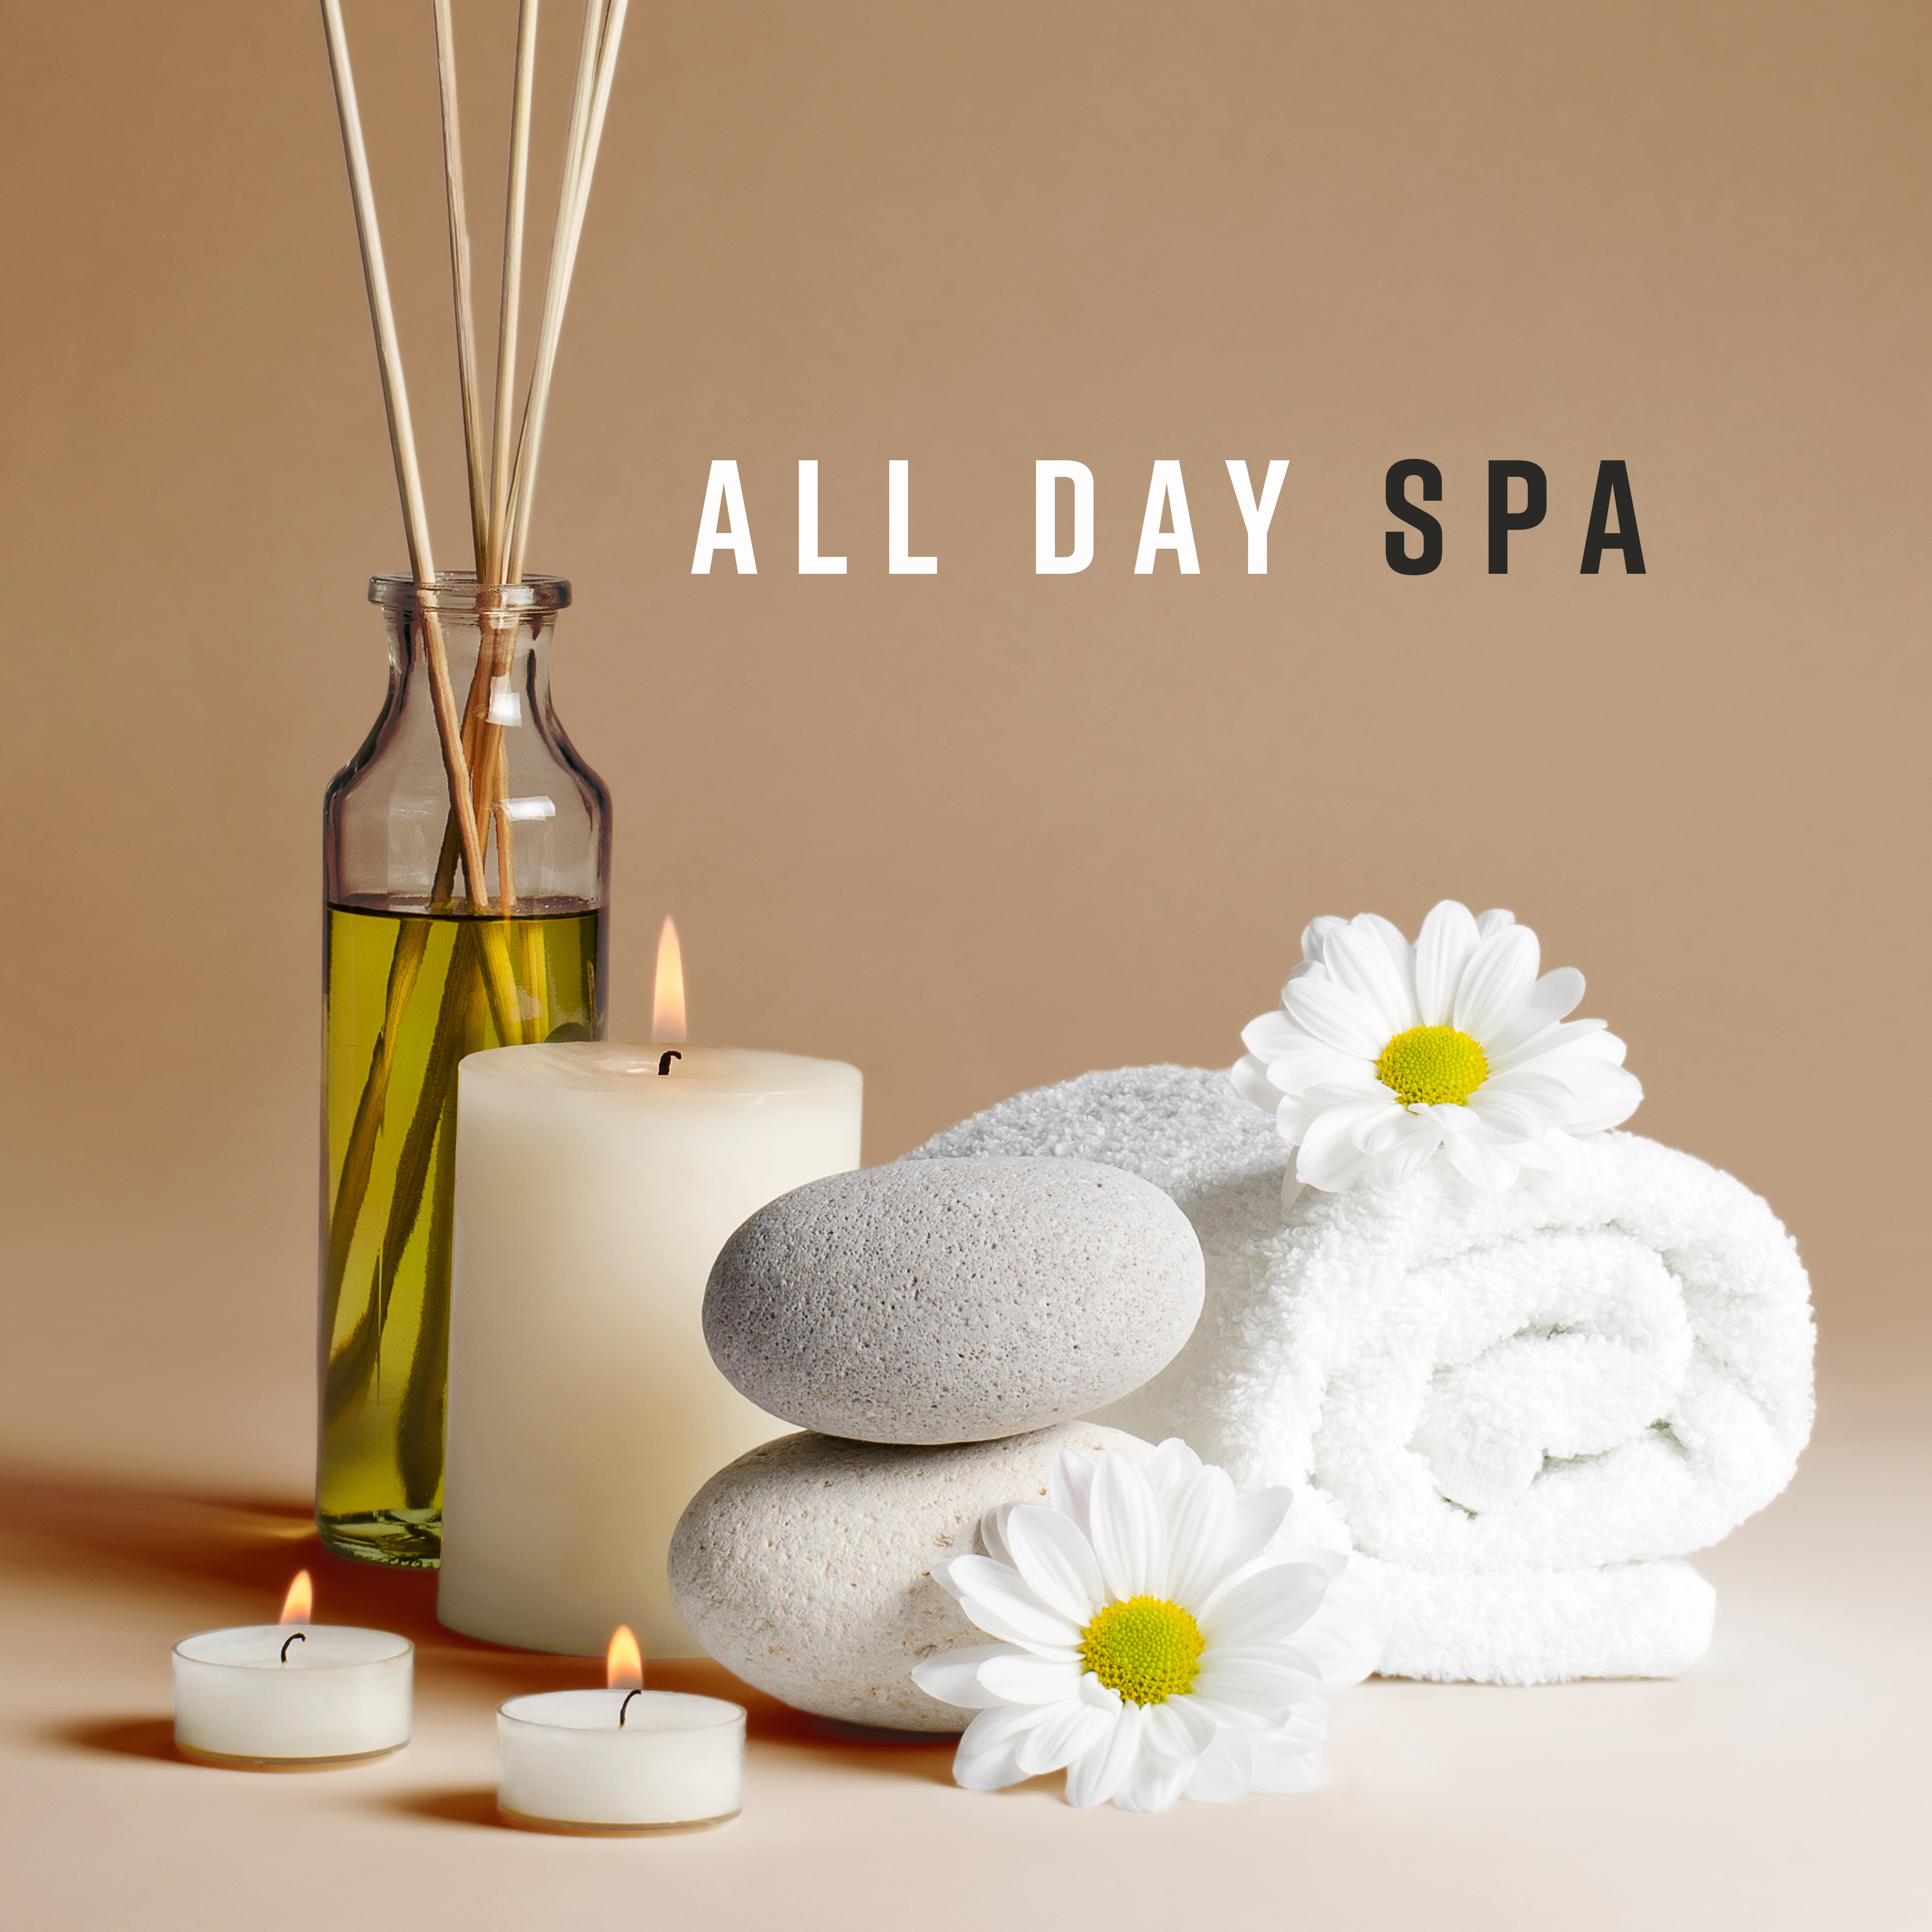 All Day Spa  Musical Background for Beauty Treatments for Your Body, for a Day Only for You, to Relax and Unwind